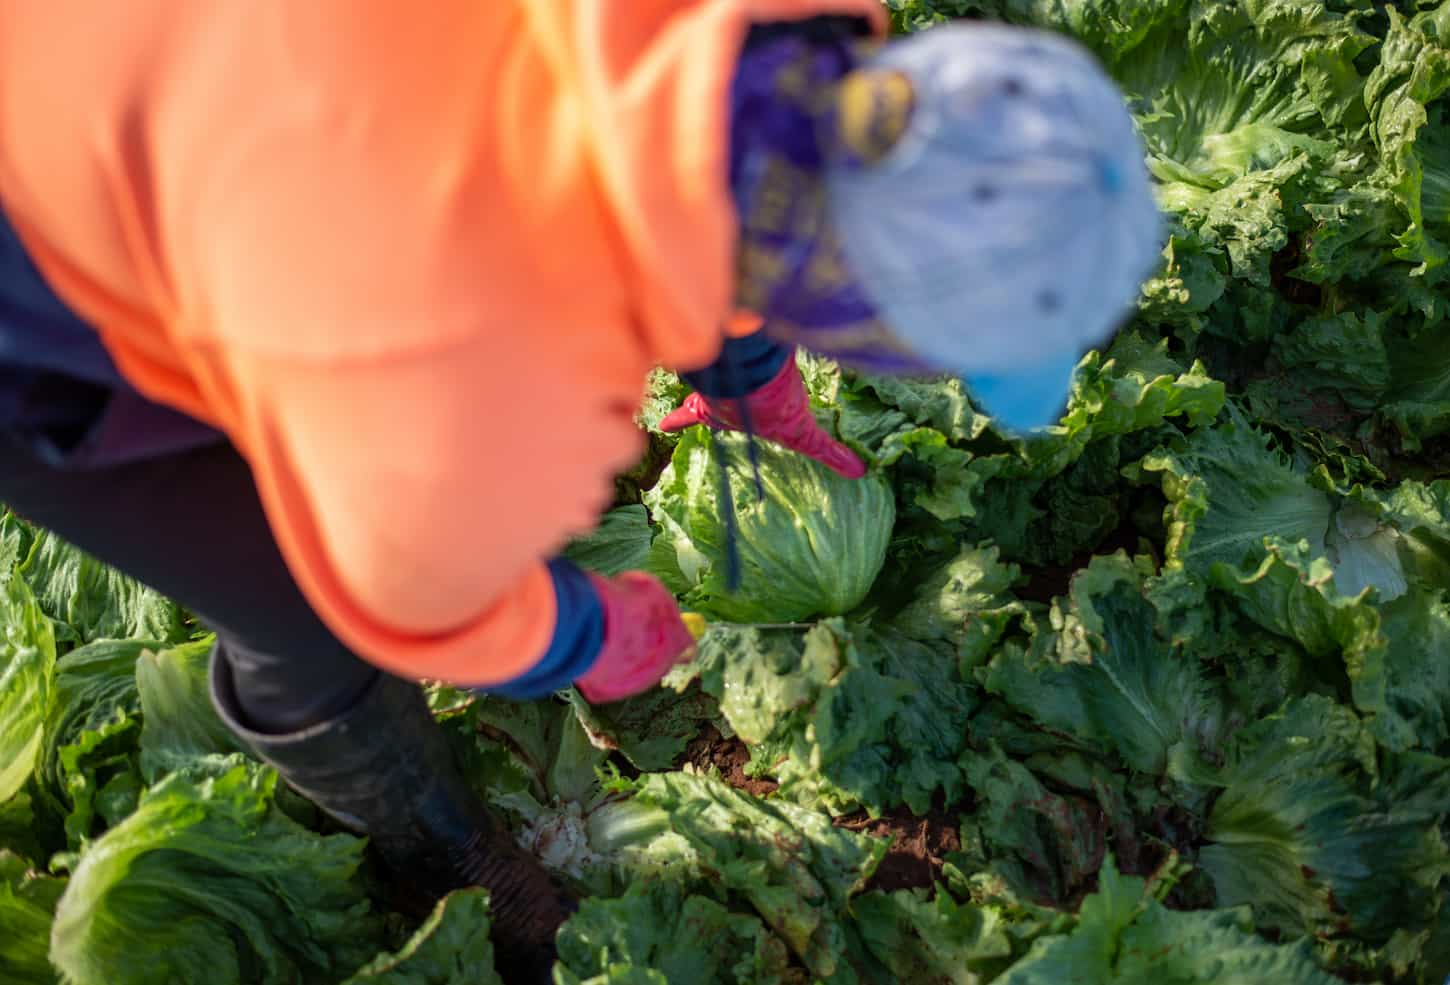 How To Harvest Lettuce Without Killing The Plant (Complete Process)